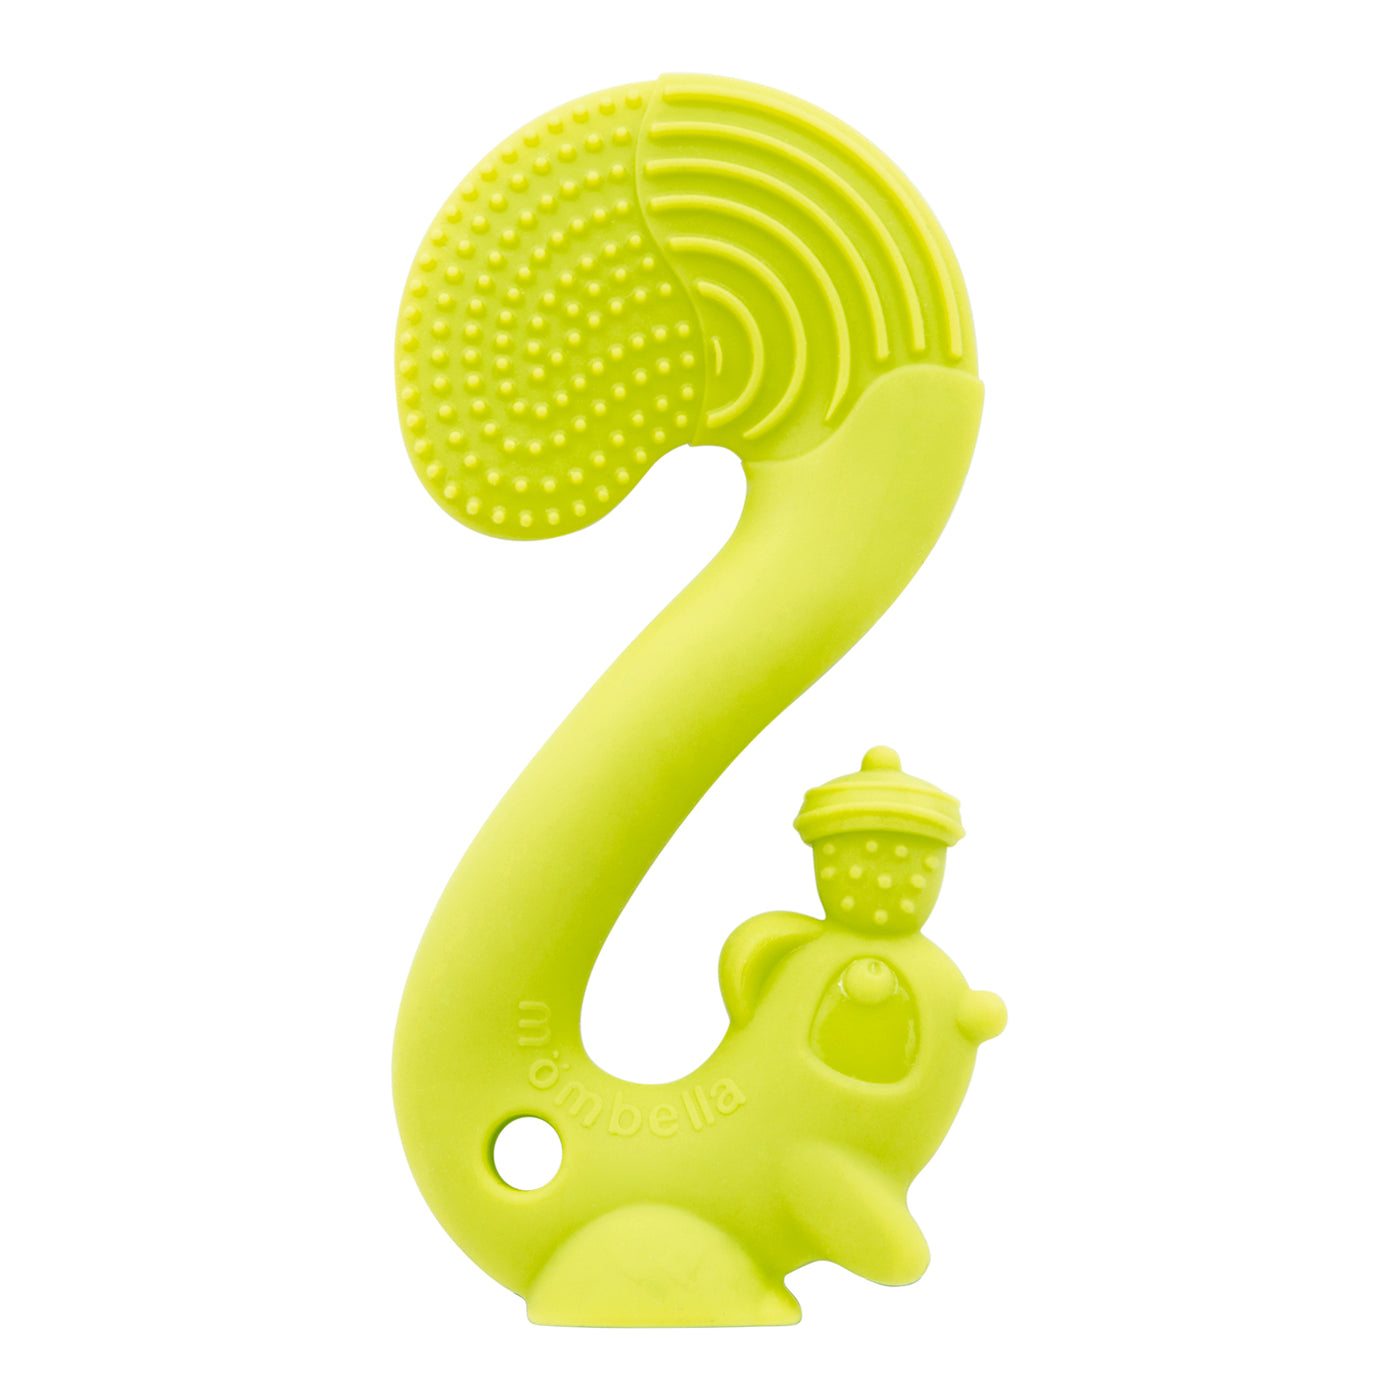 Mombella Squirrel Teether Toy For 6 Month+ Baby Original Design - mombella